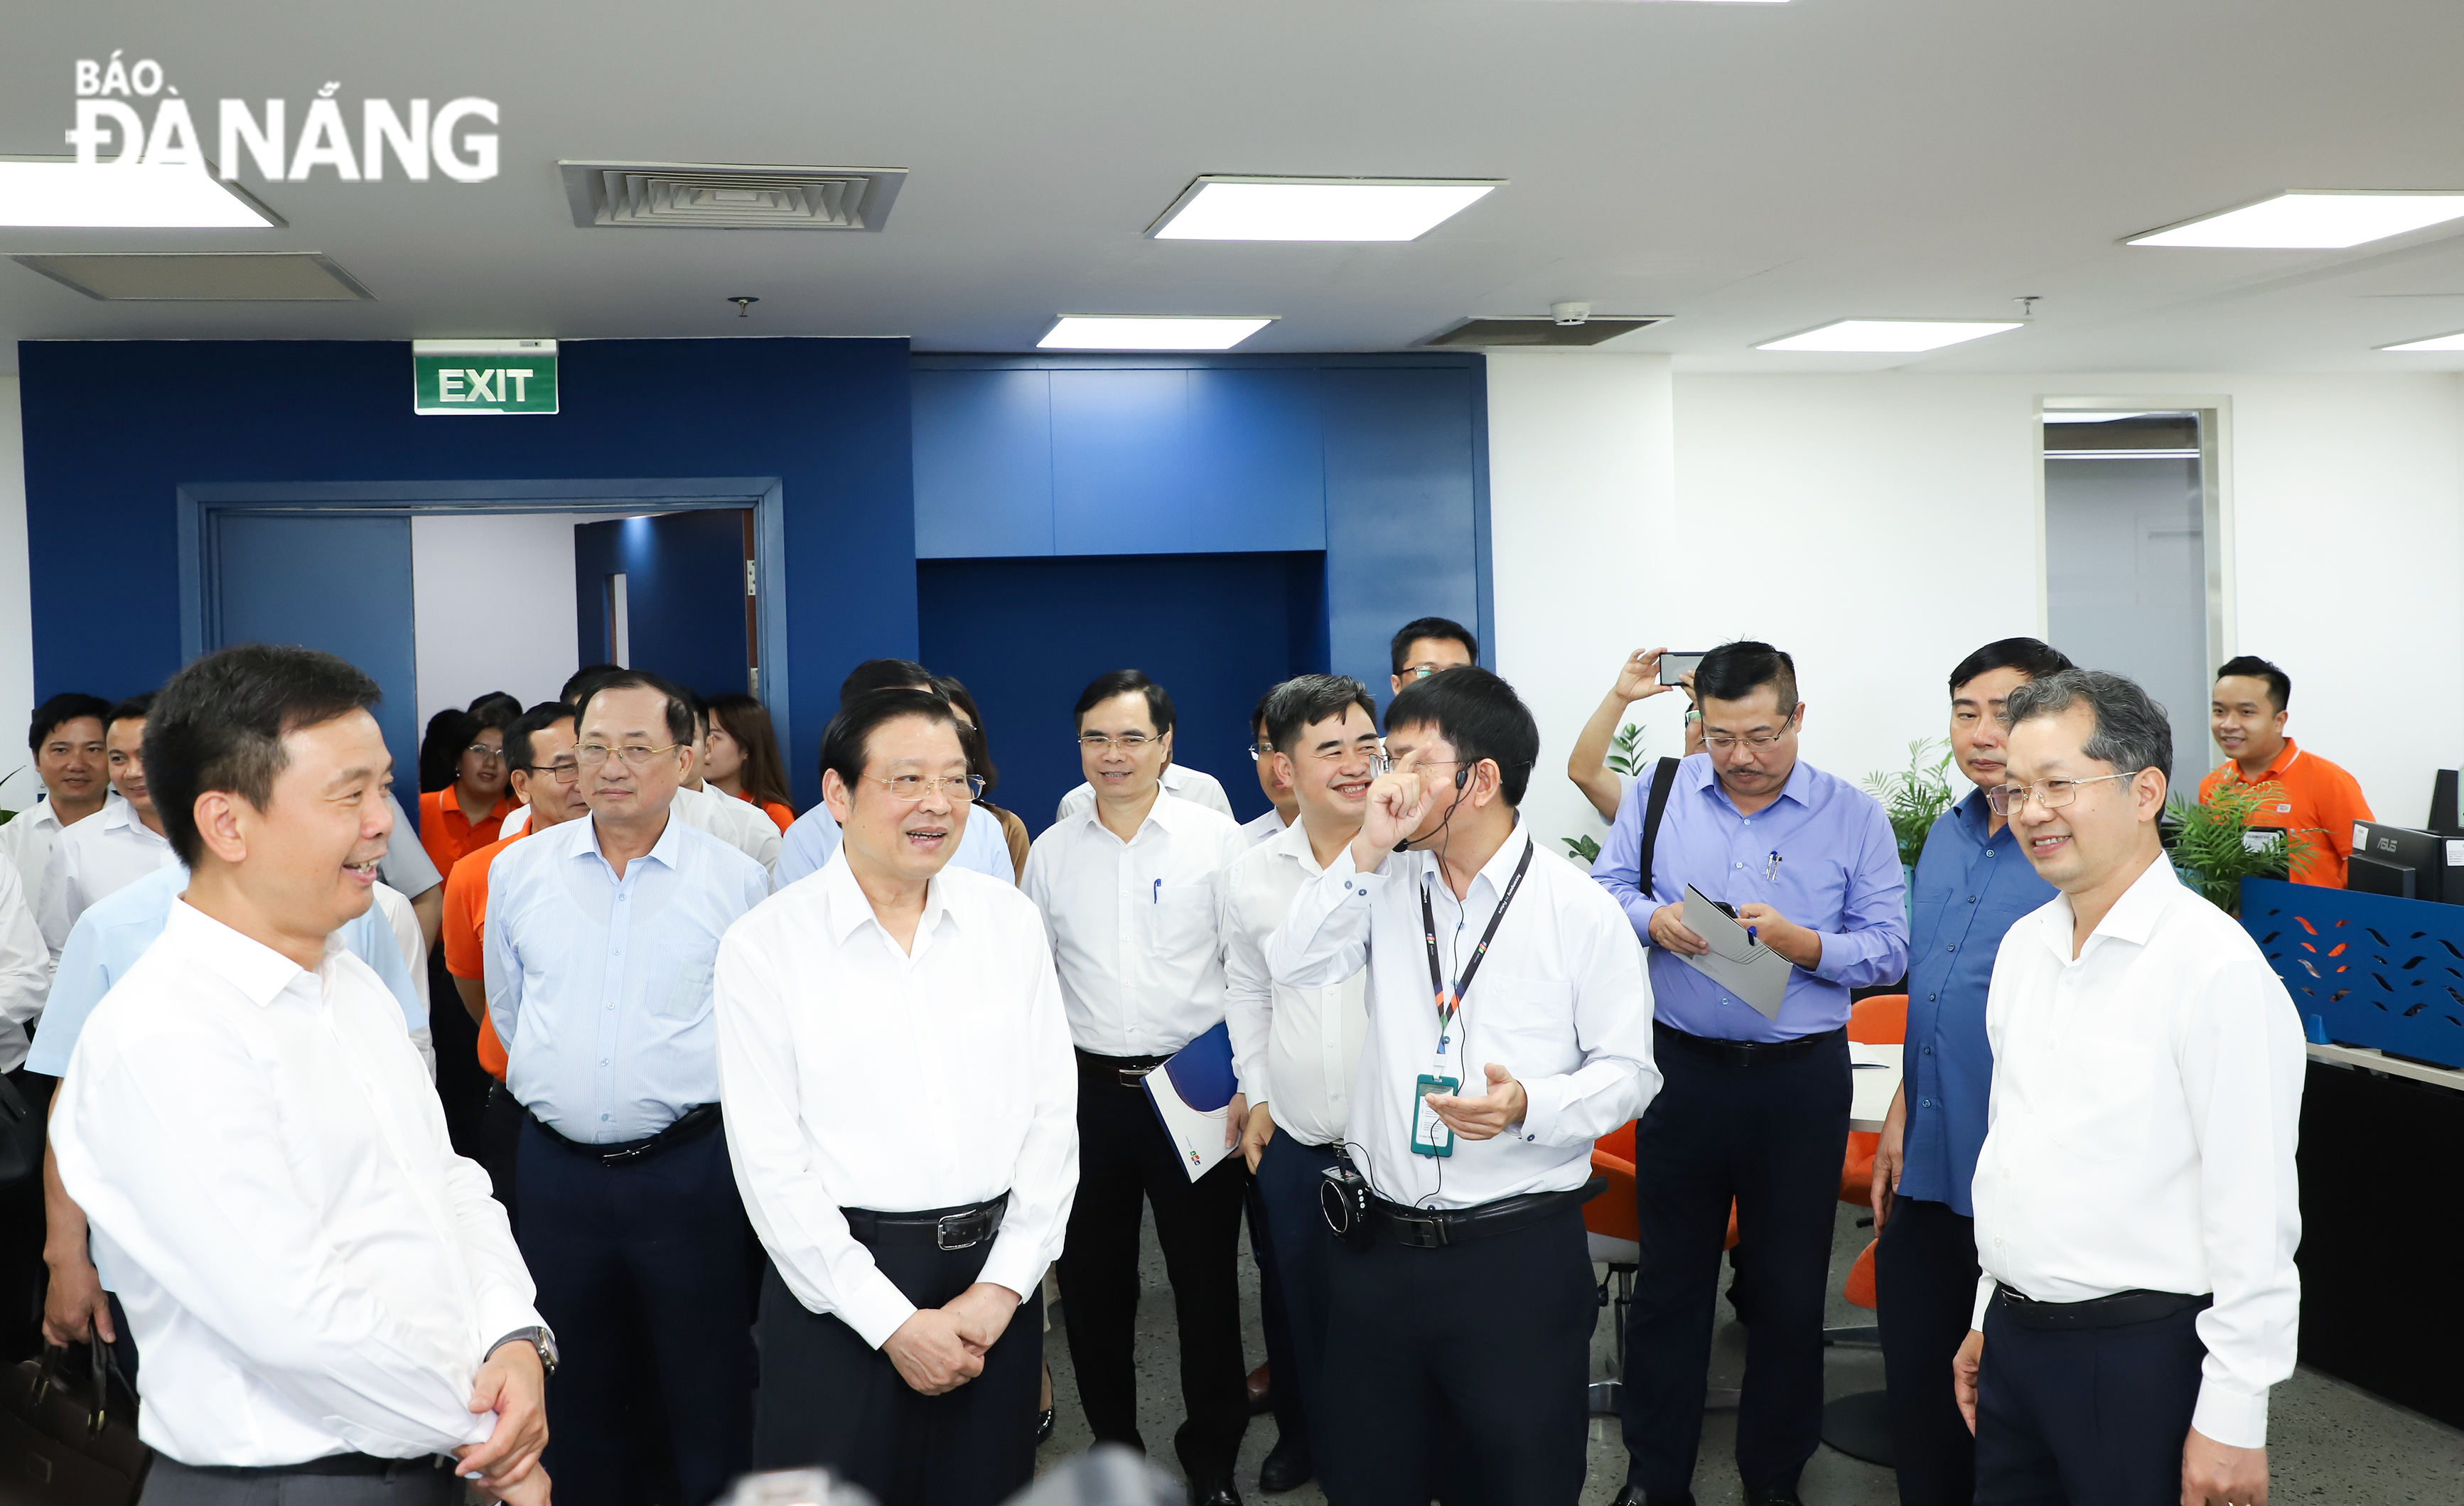 Mr. Phan Dinh Trac, Chairman of the Party Central Committee’s Commission for Internal Affairs, (2nd,left) and Da Nang Party Committee Secretary Nguyen Van Quang (first, right) paying a visit to the Da Nang FPT Complex